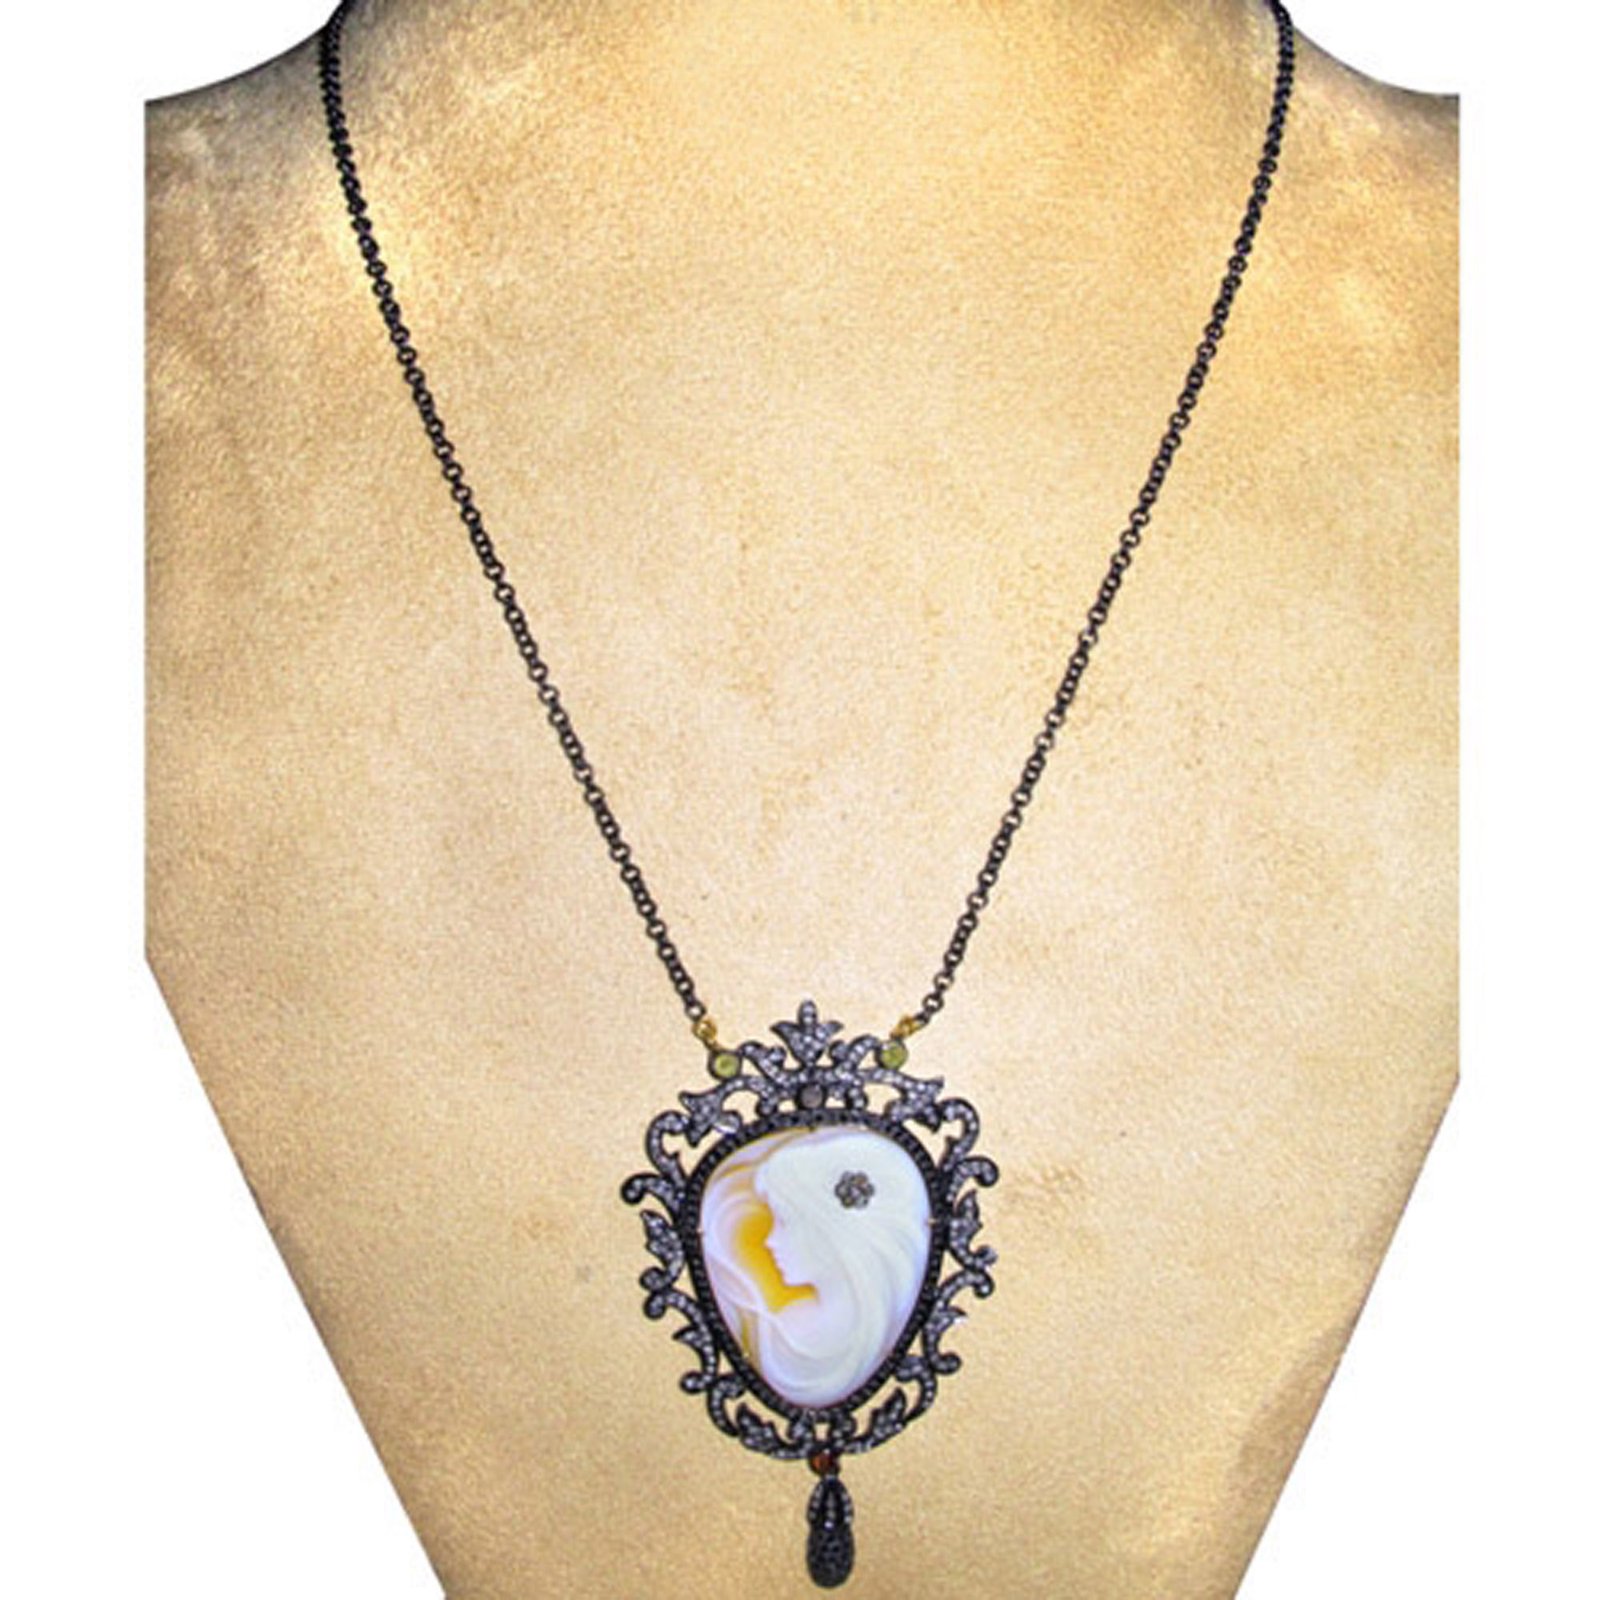 Cameo carving diamond vintage chain necklace